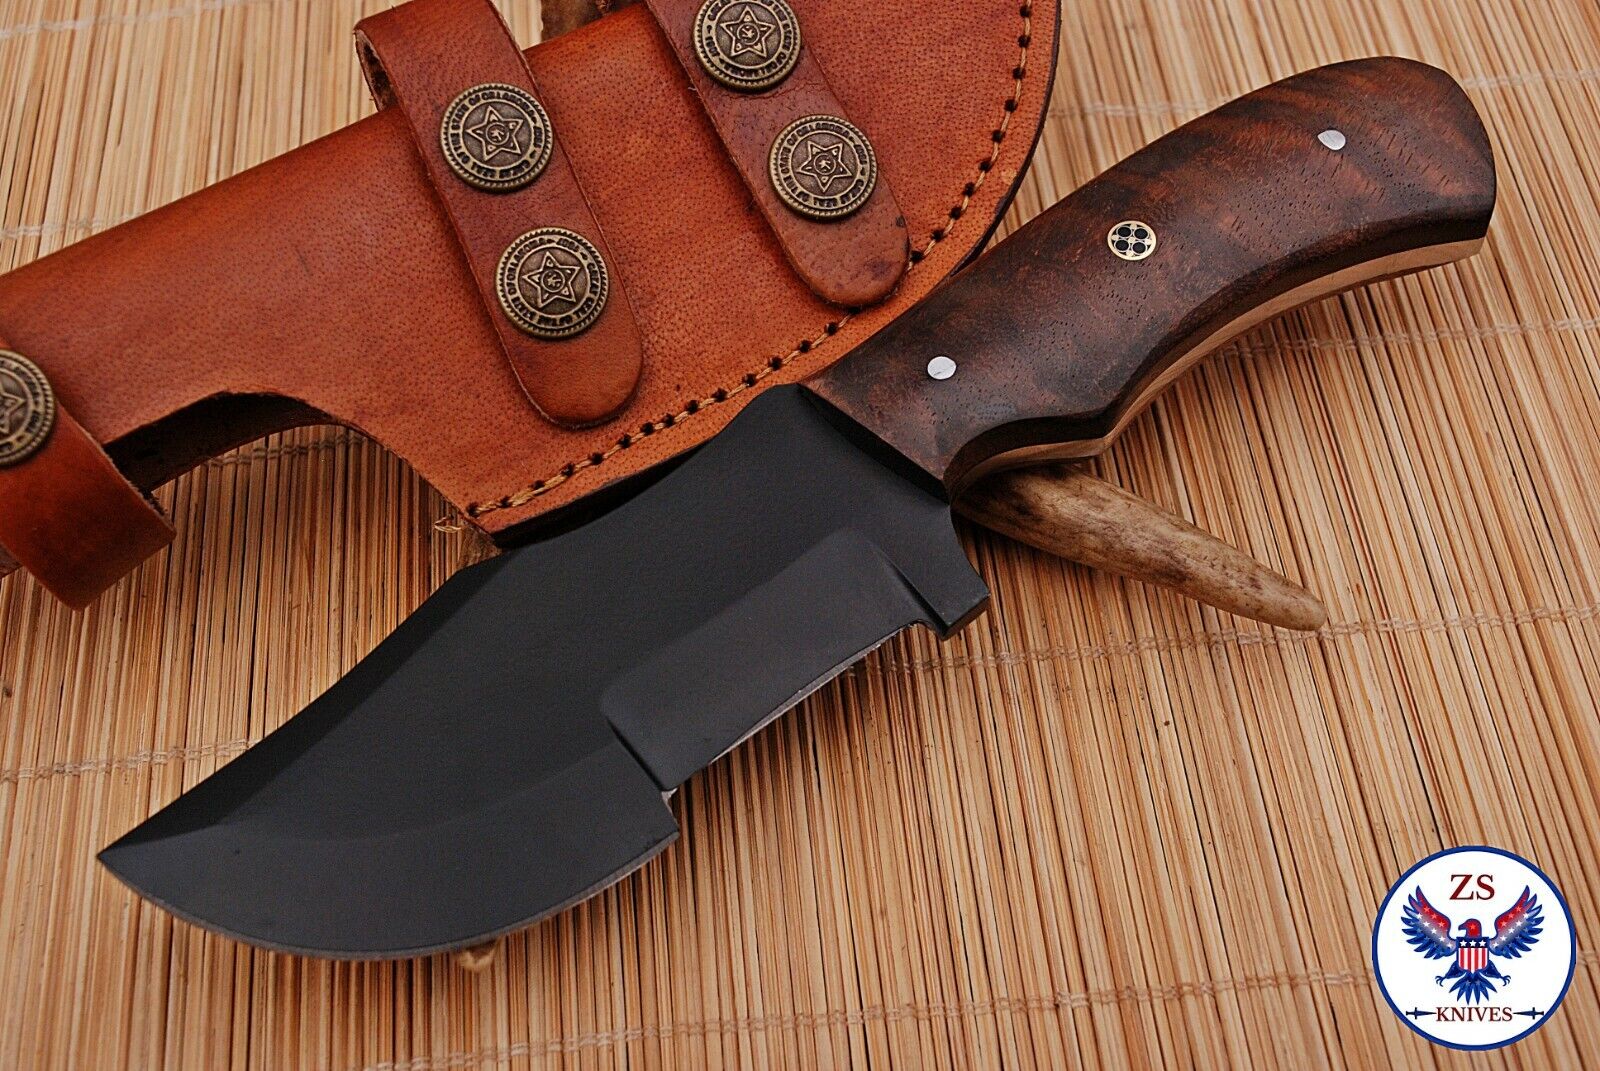 TRACKER 1095 CARBON STEEL TRACKER HUNTING KNIFE WITH WOOD HANDLE - ZS 82